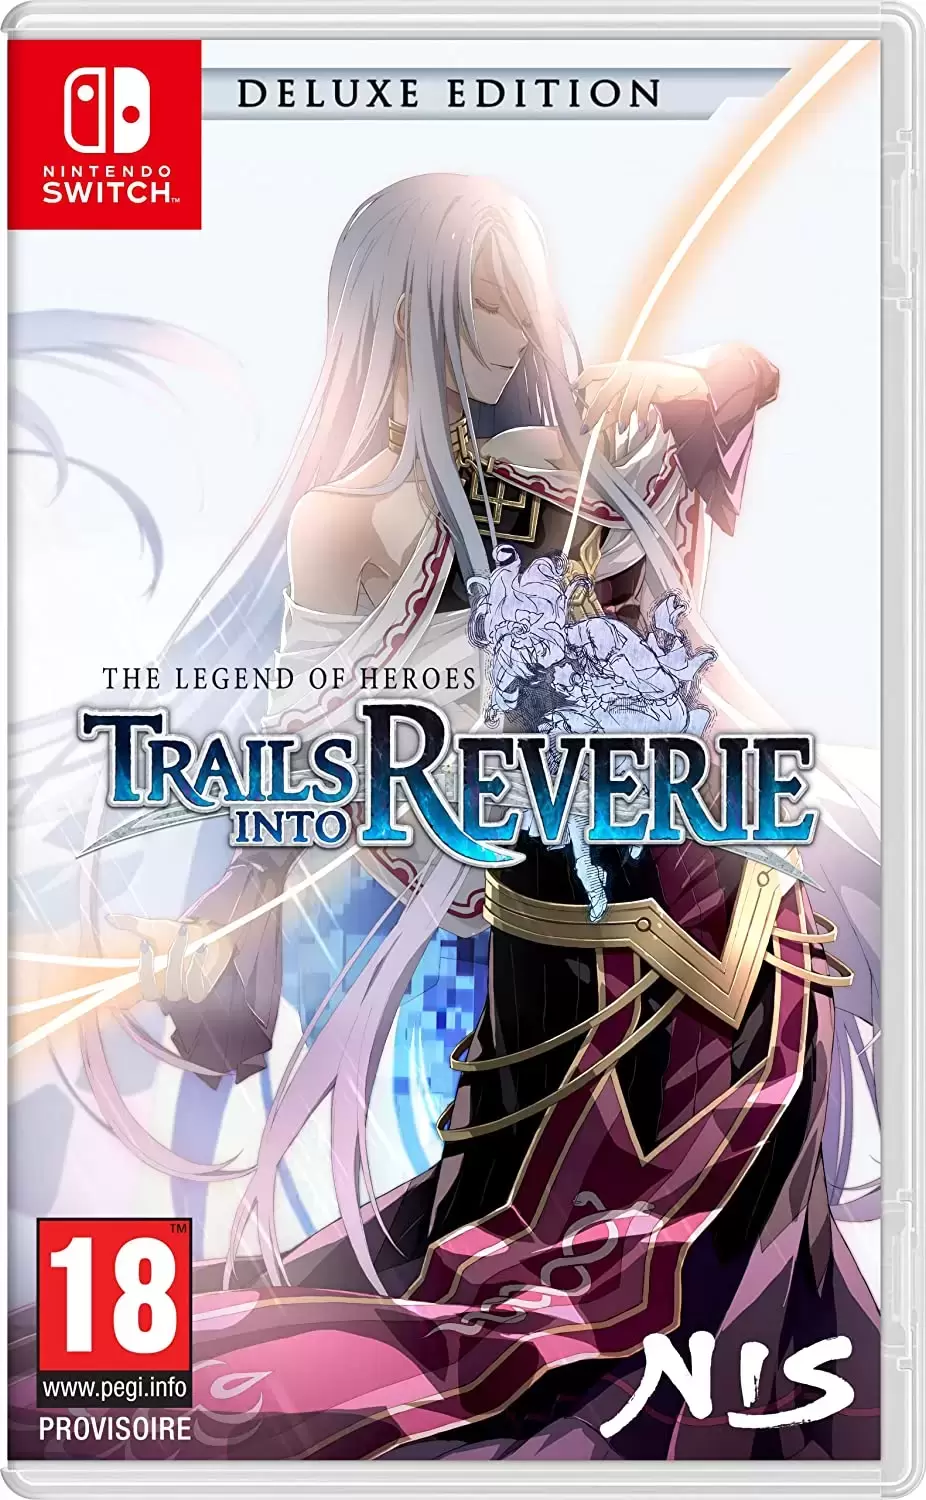 Jeux Nintendo Switch - The Legend Of Heroes Trails Into Reverie - Deluxe Edition